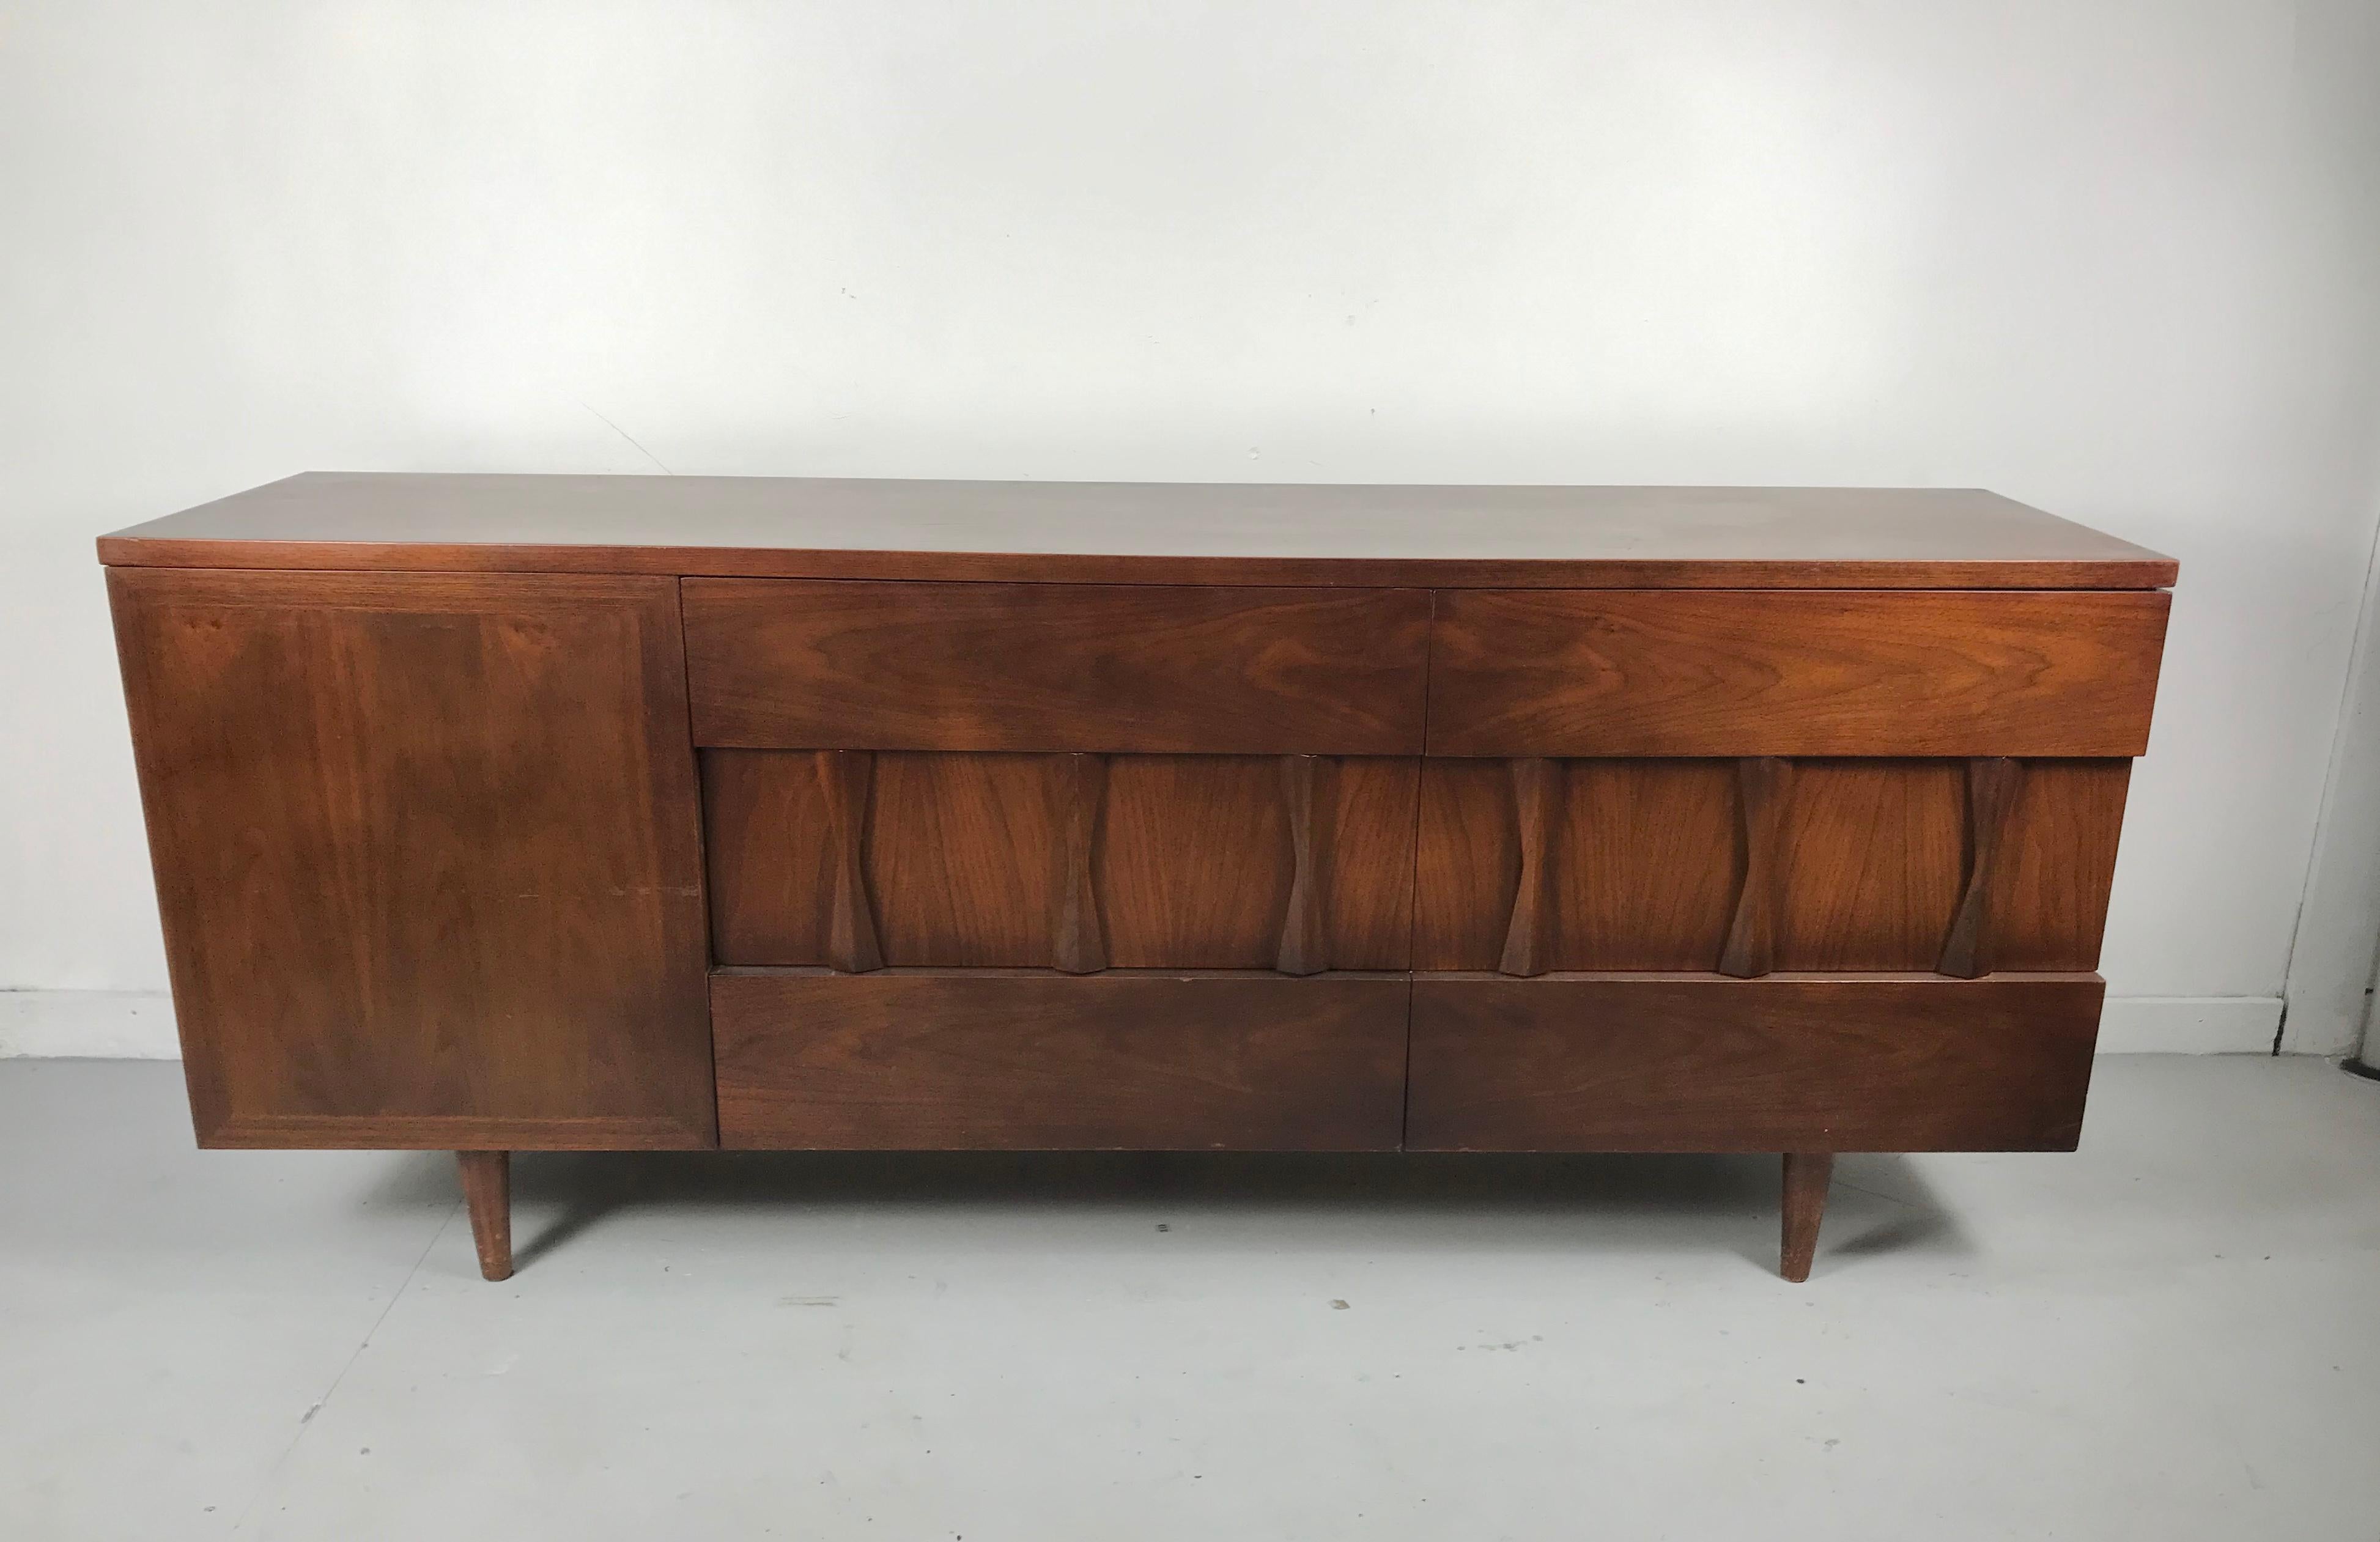 Unusual 9-drawer dresser, sculpted walnut made by American of Martinsville. Amazing architectural design. Over 30 years in the business, i have never come across this line. Featuring 6 generous size drawers with stunning sculpted pulls, left side